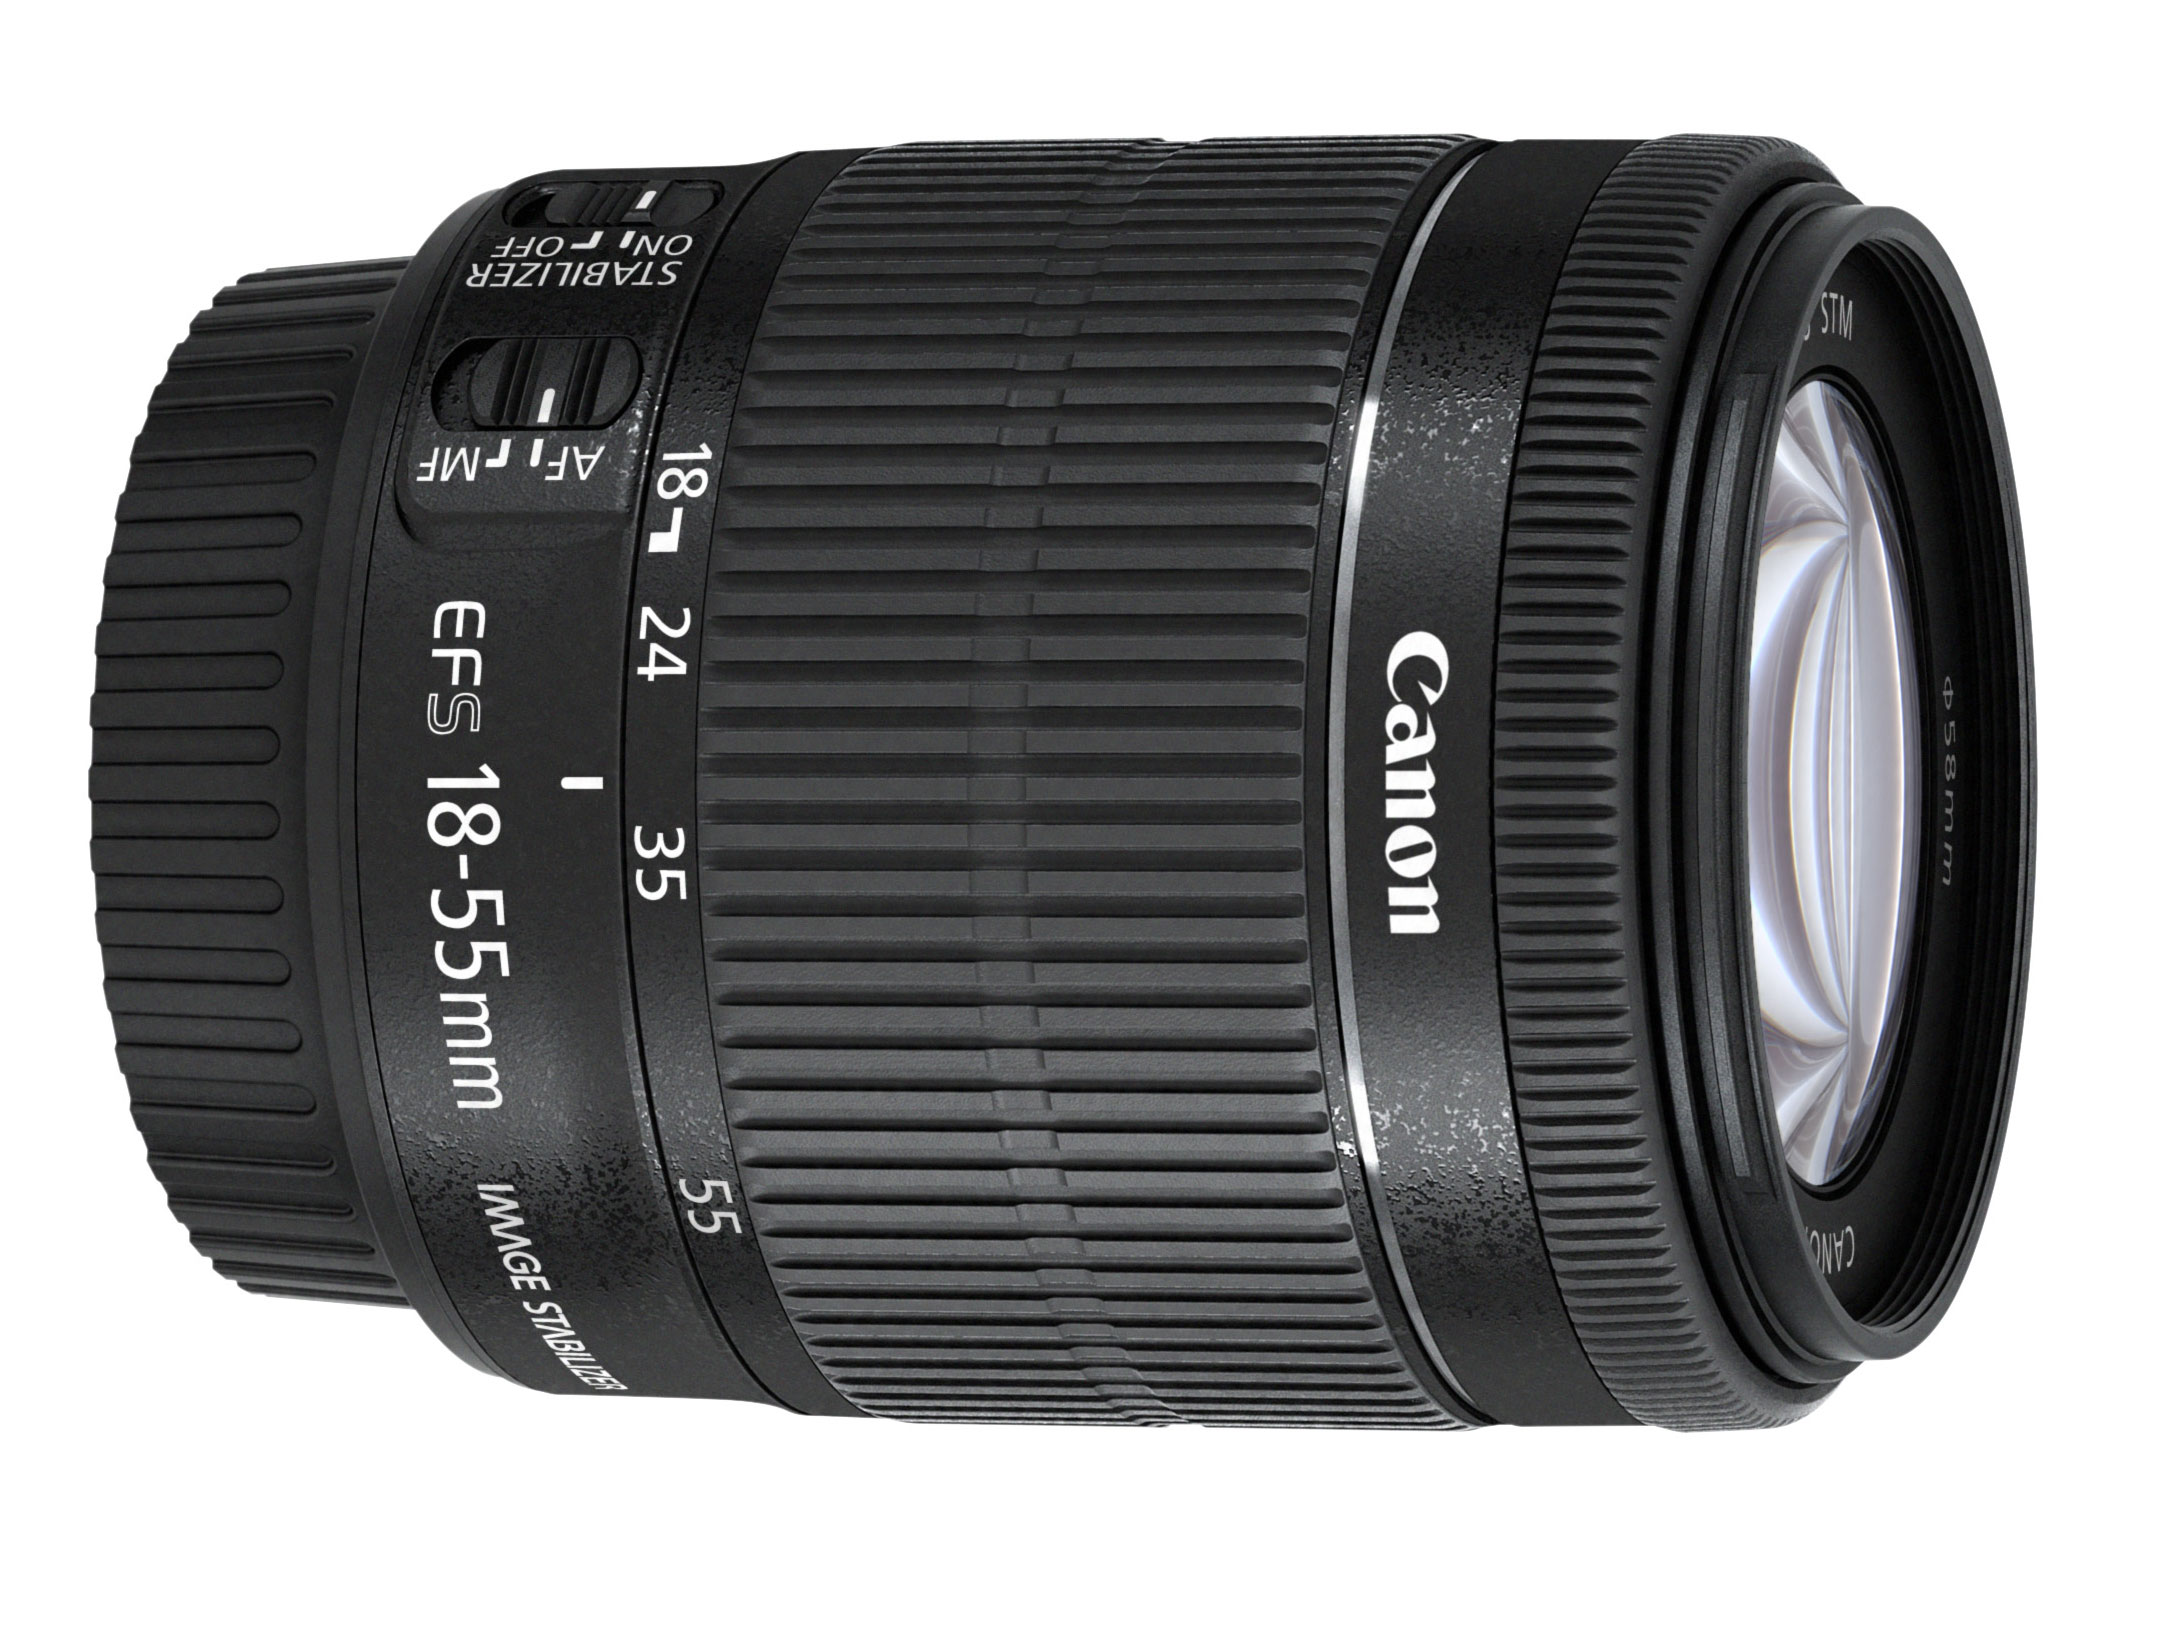 Canon EF-S 18-55mm f/3.5-5.6 IS STM - Digital Photography Live